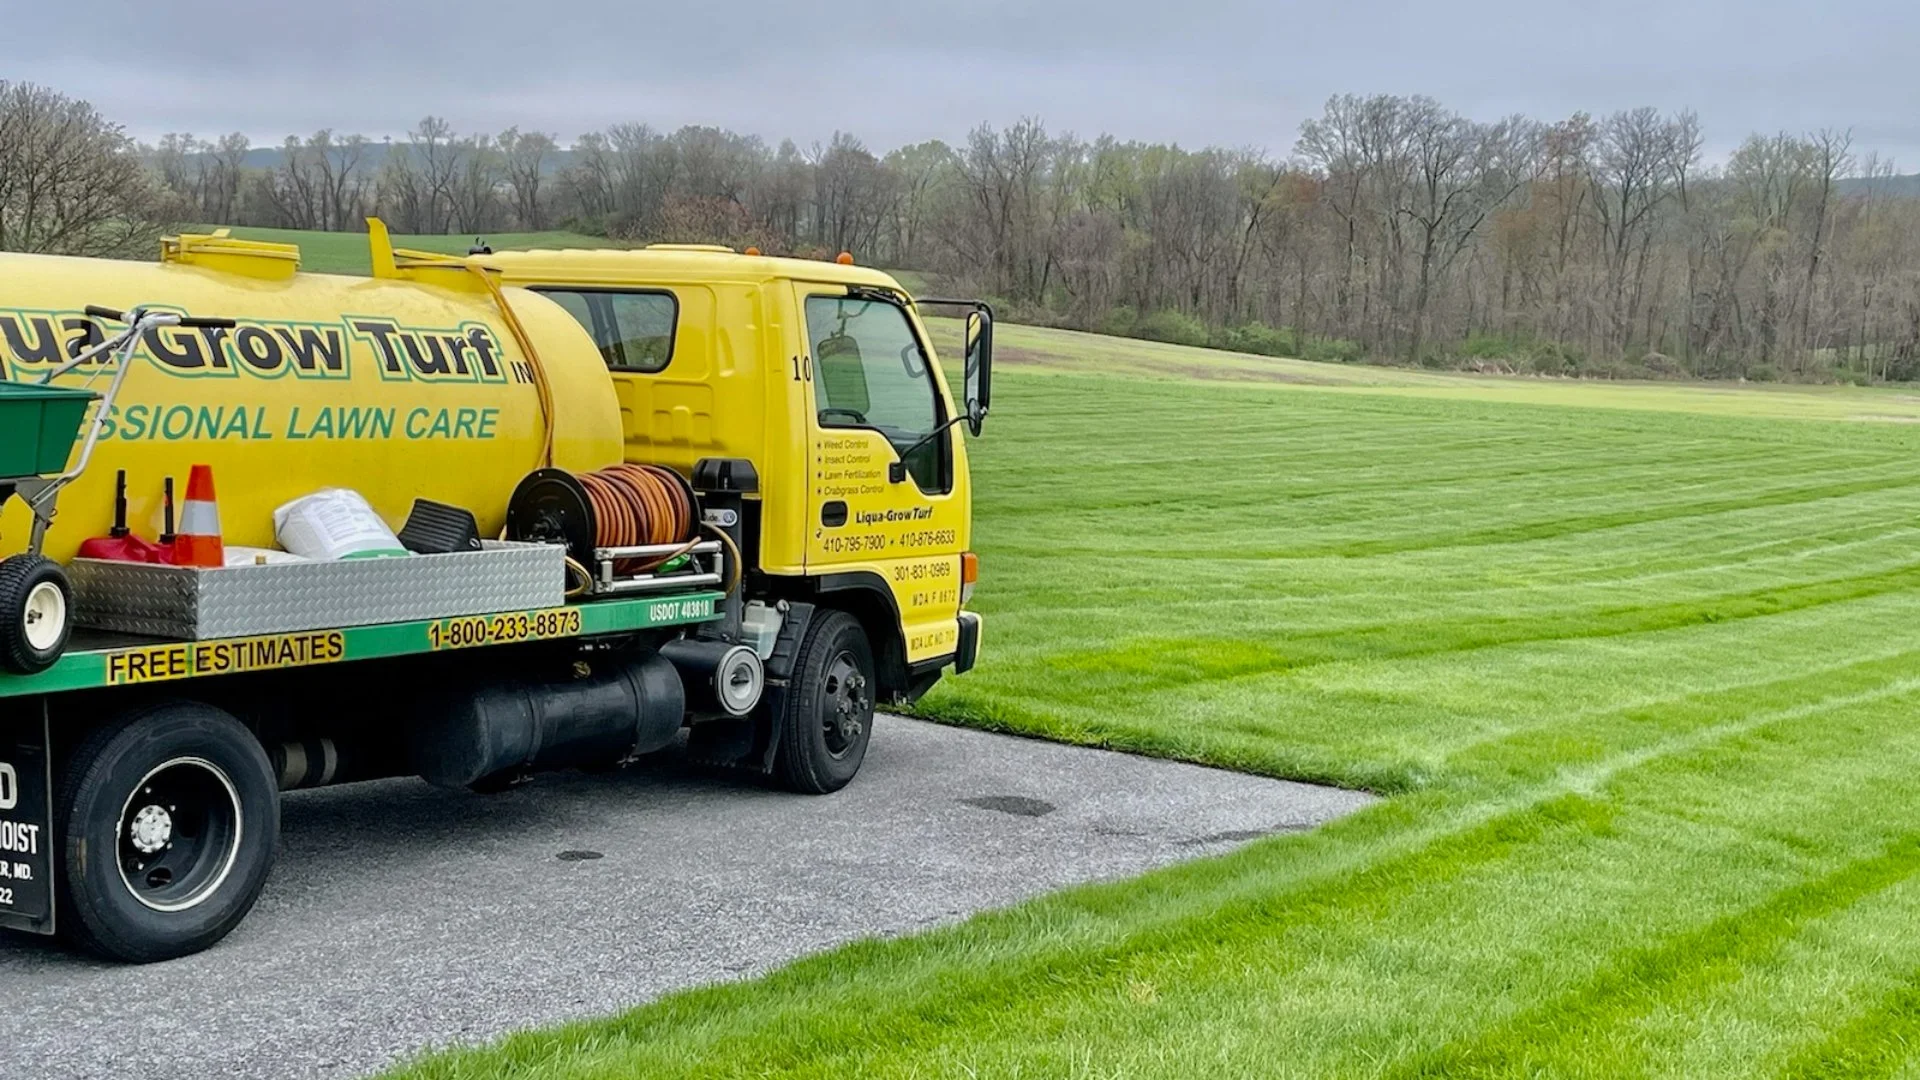 Lawn care and pest control company truck.